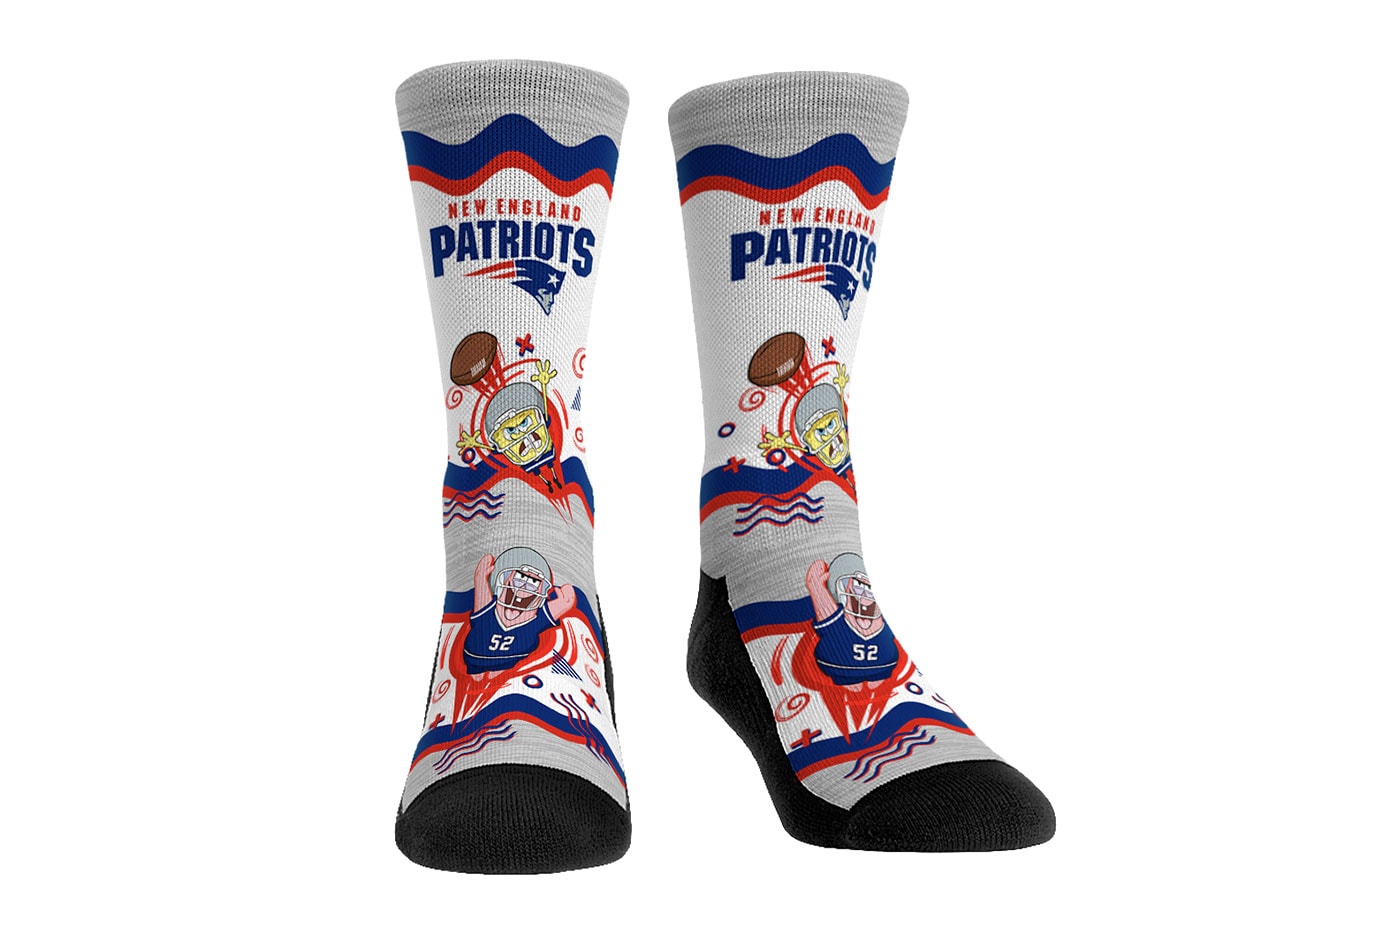 NFL Taps Into Childhood Nostalgia With Nickelodeon-Themed Merch on Super Wild Card Weekend new england patriots green bay packers san franciscio 49ers dallas cowboys 